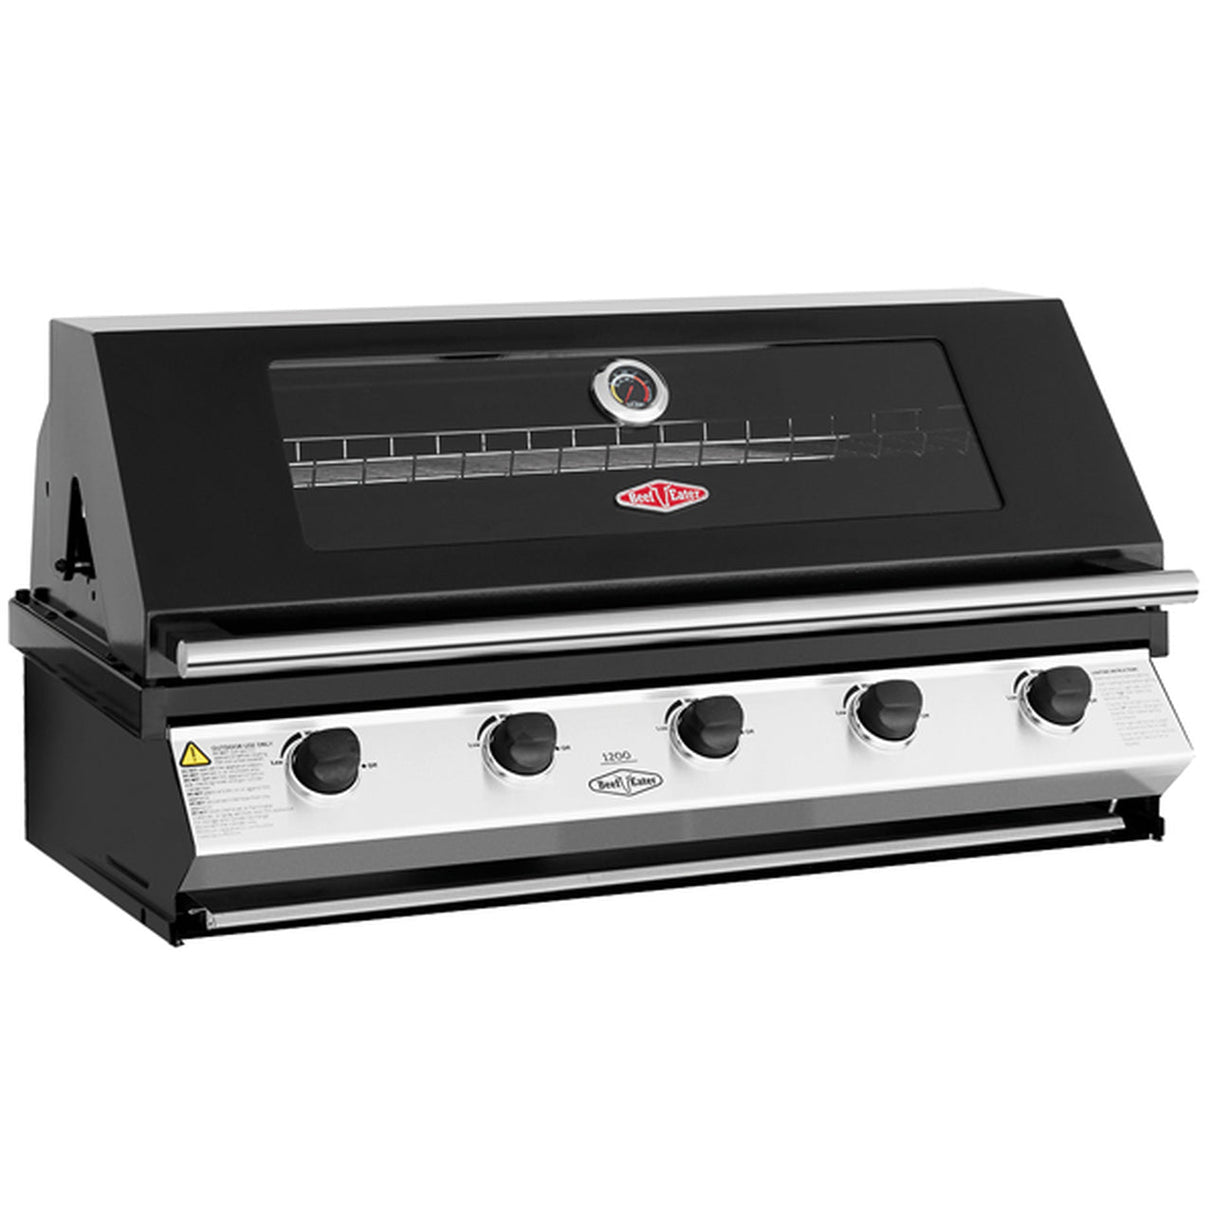 BEEFEATER 1200E BUILT-IN 5 BURNER GAS BBQ